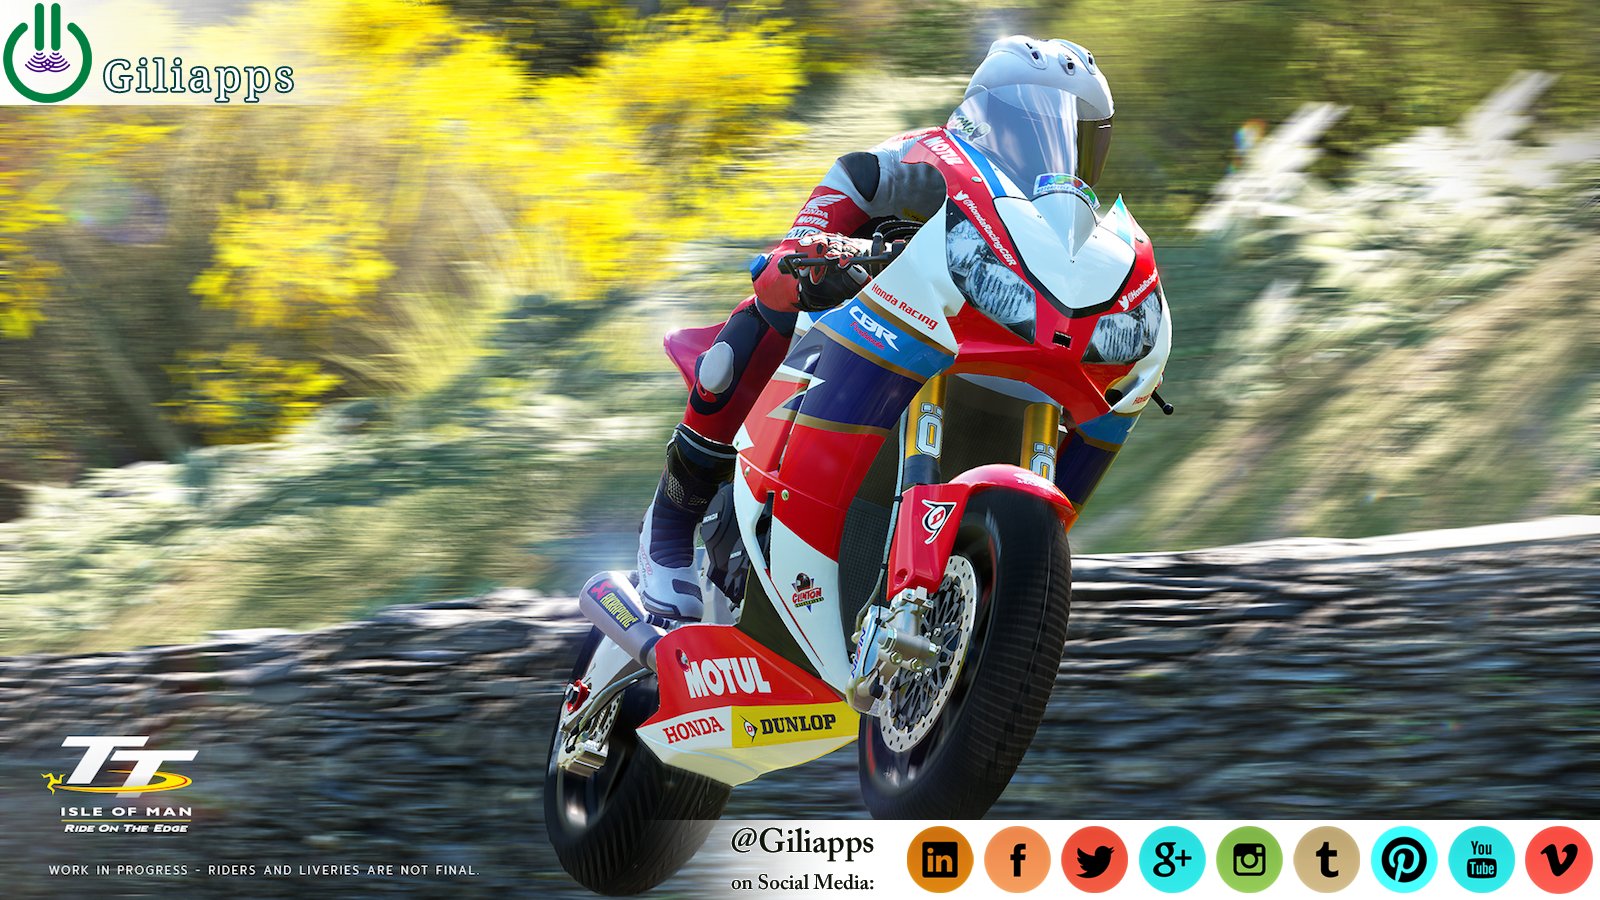 TT Isle of Man: Ride on the Edge will release on 06 Mar 2018